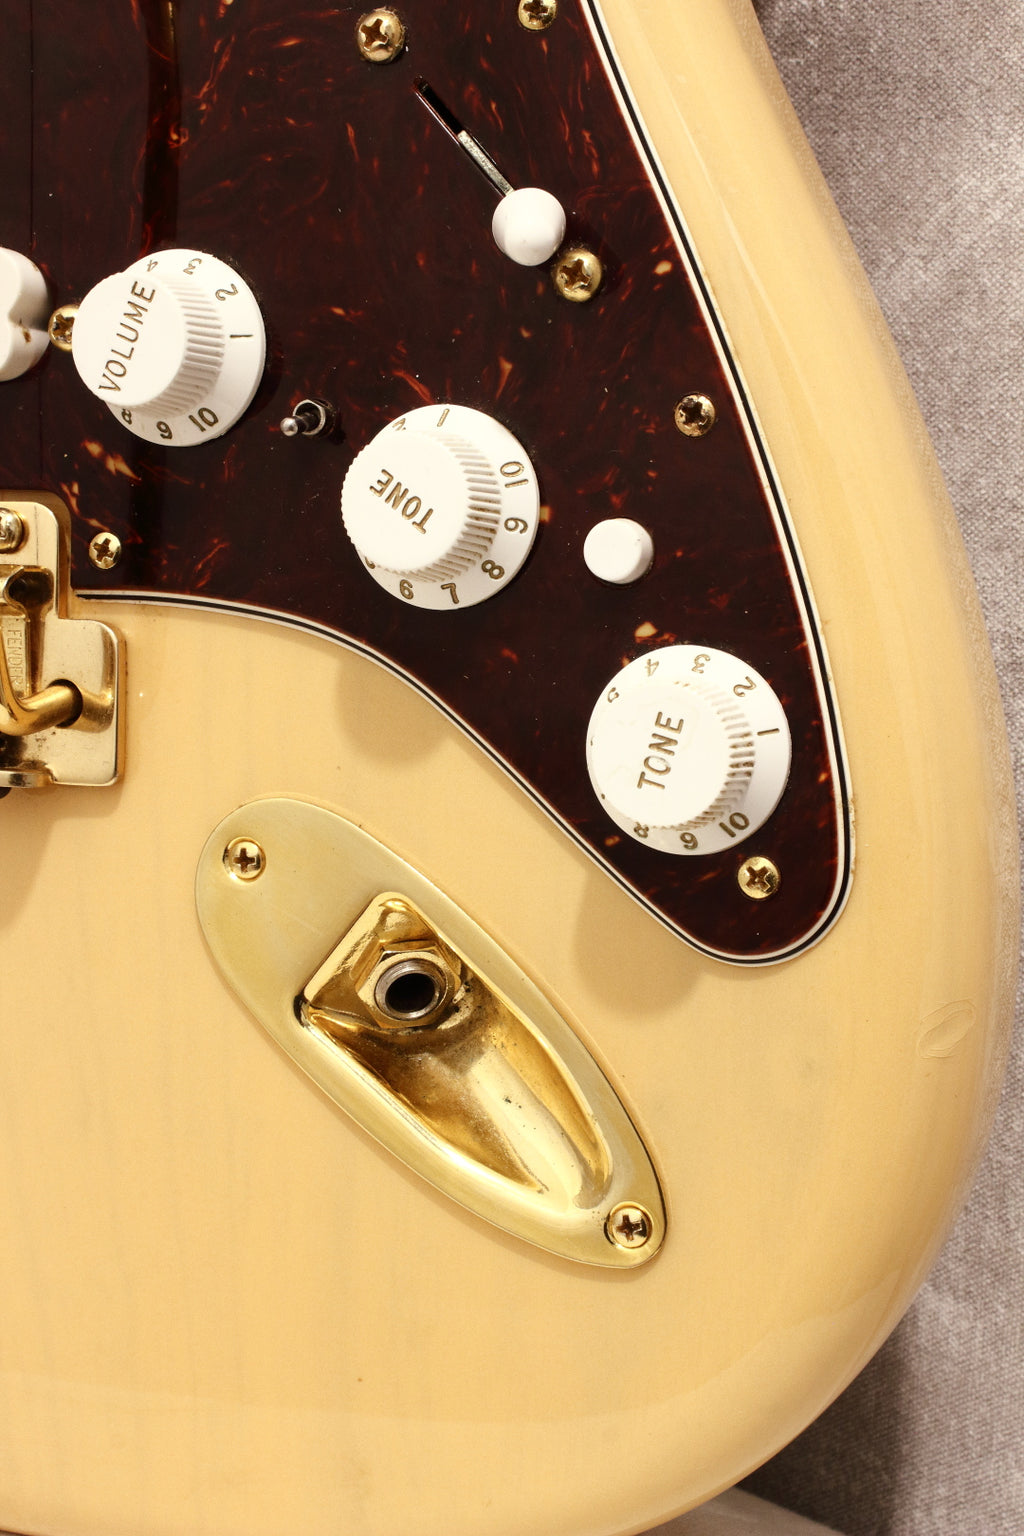 Fender Deluxe Stratocaster Butterscotch 2012